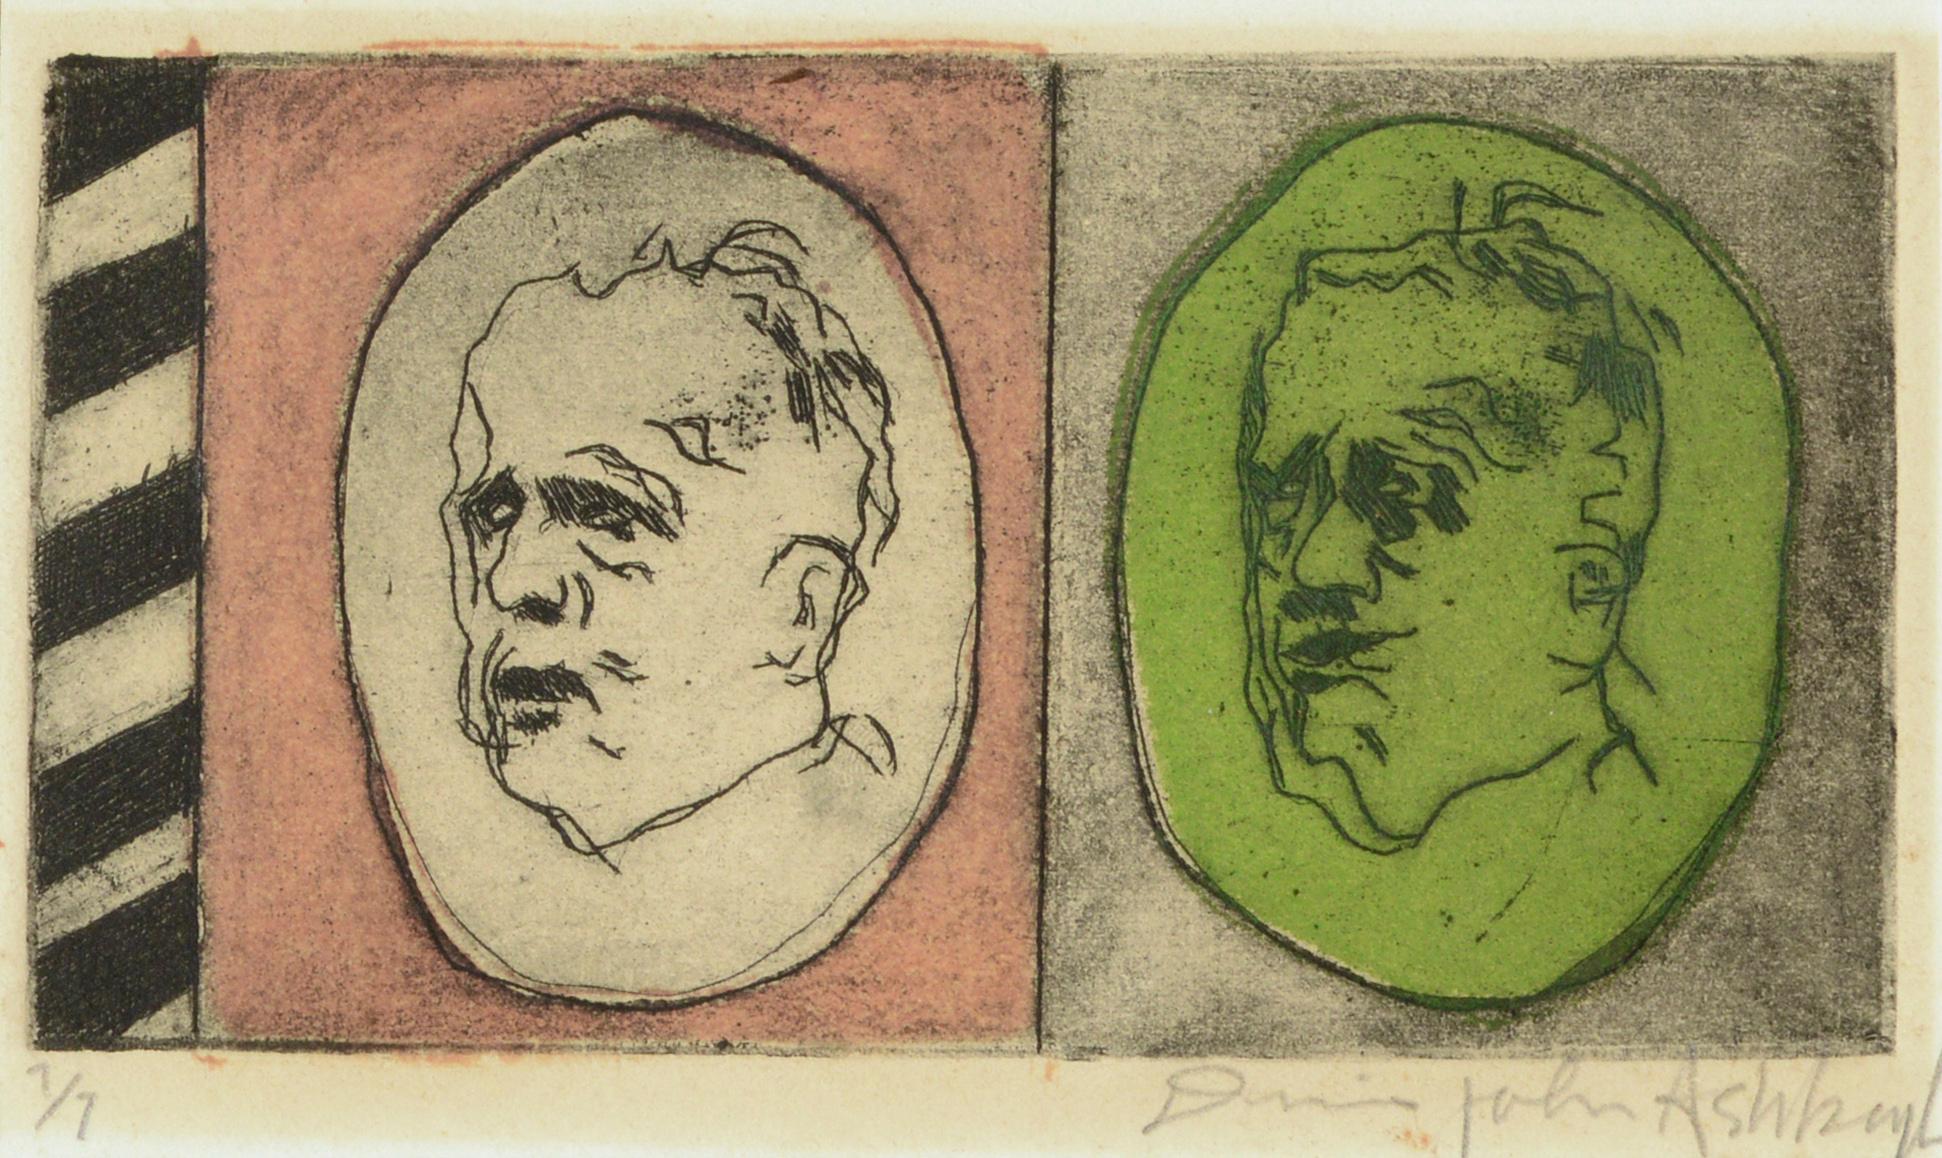 Two Faces, Modern Self-Portrait Lithograph of the Artist Aging in Pink & Green - Print by Dennis John Ashbaugh